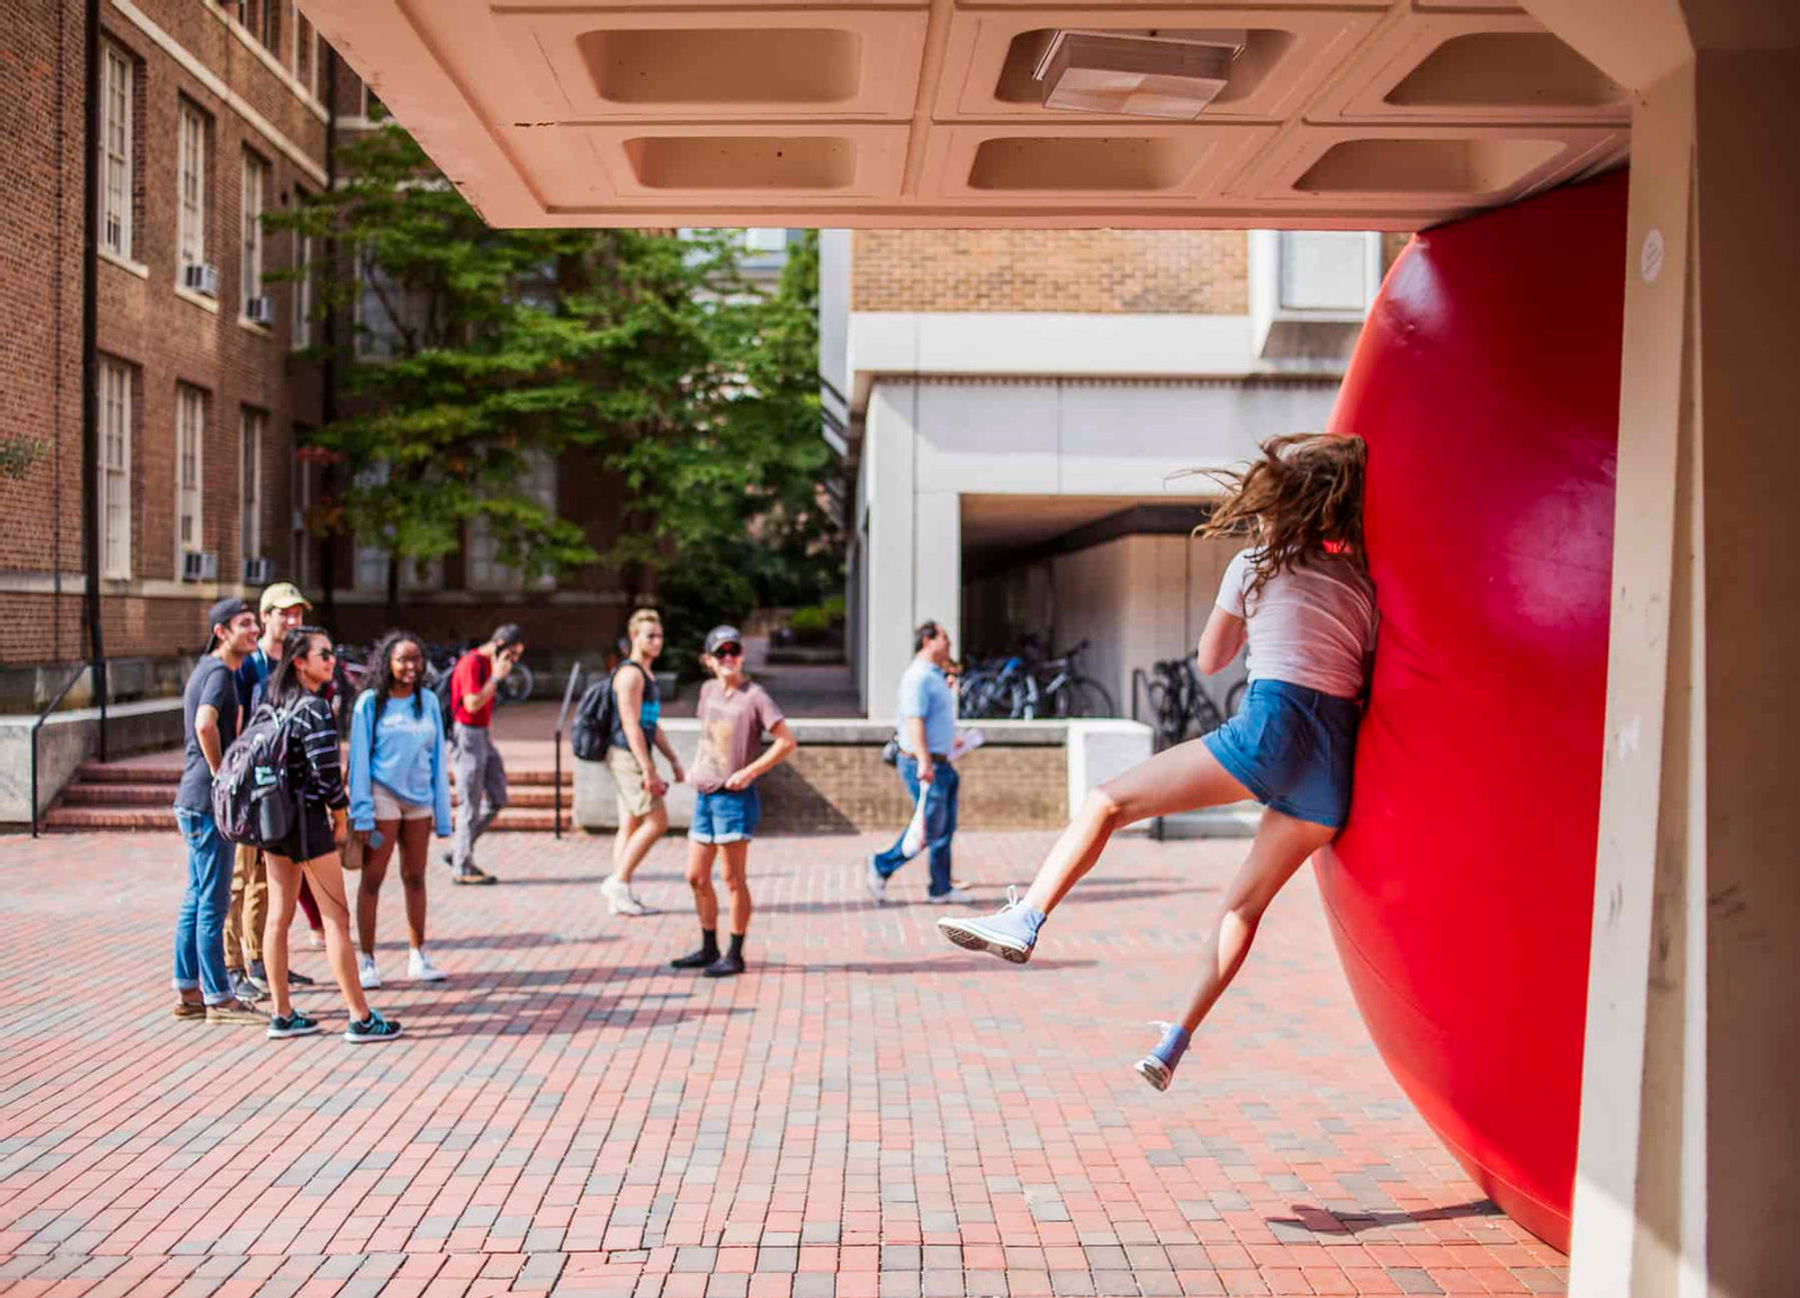 image of large red ball and a girl bouncing against it with a group watching, standing on a brick sidewalk